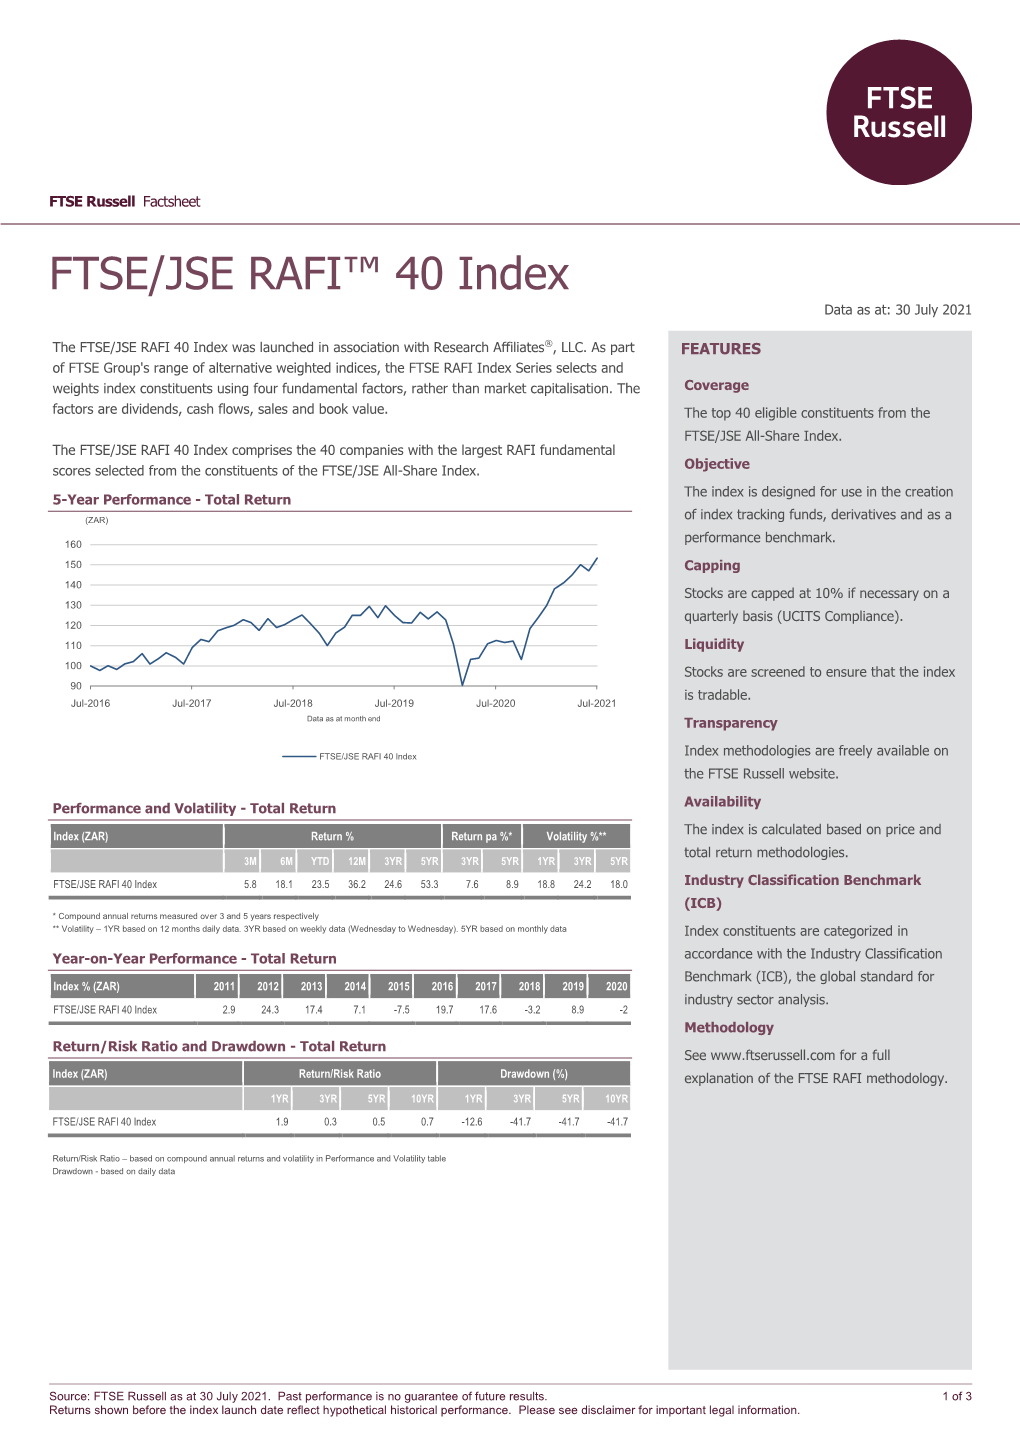 FTSE/JSE RAFI 40 Index Was Launched in Association with Research Affiliates®, LLC